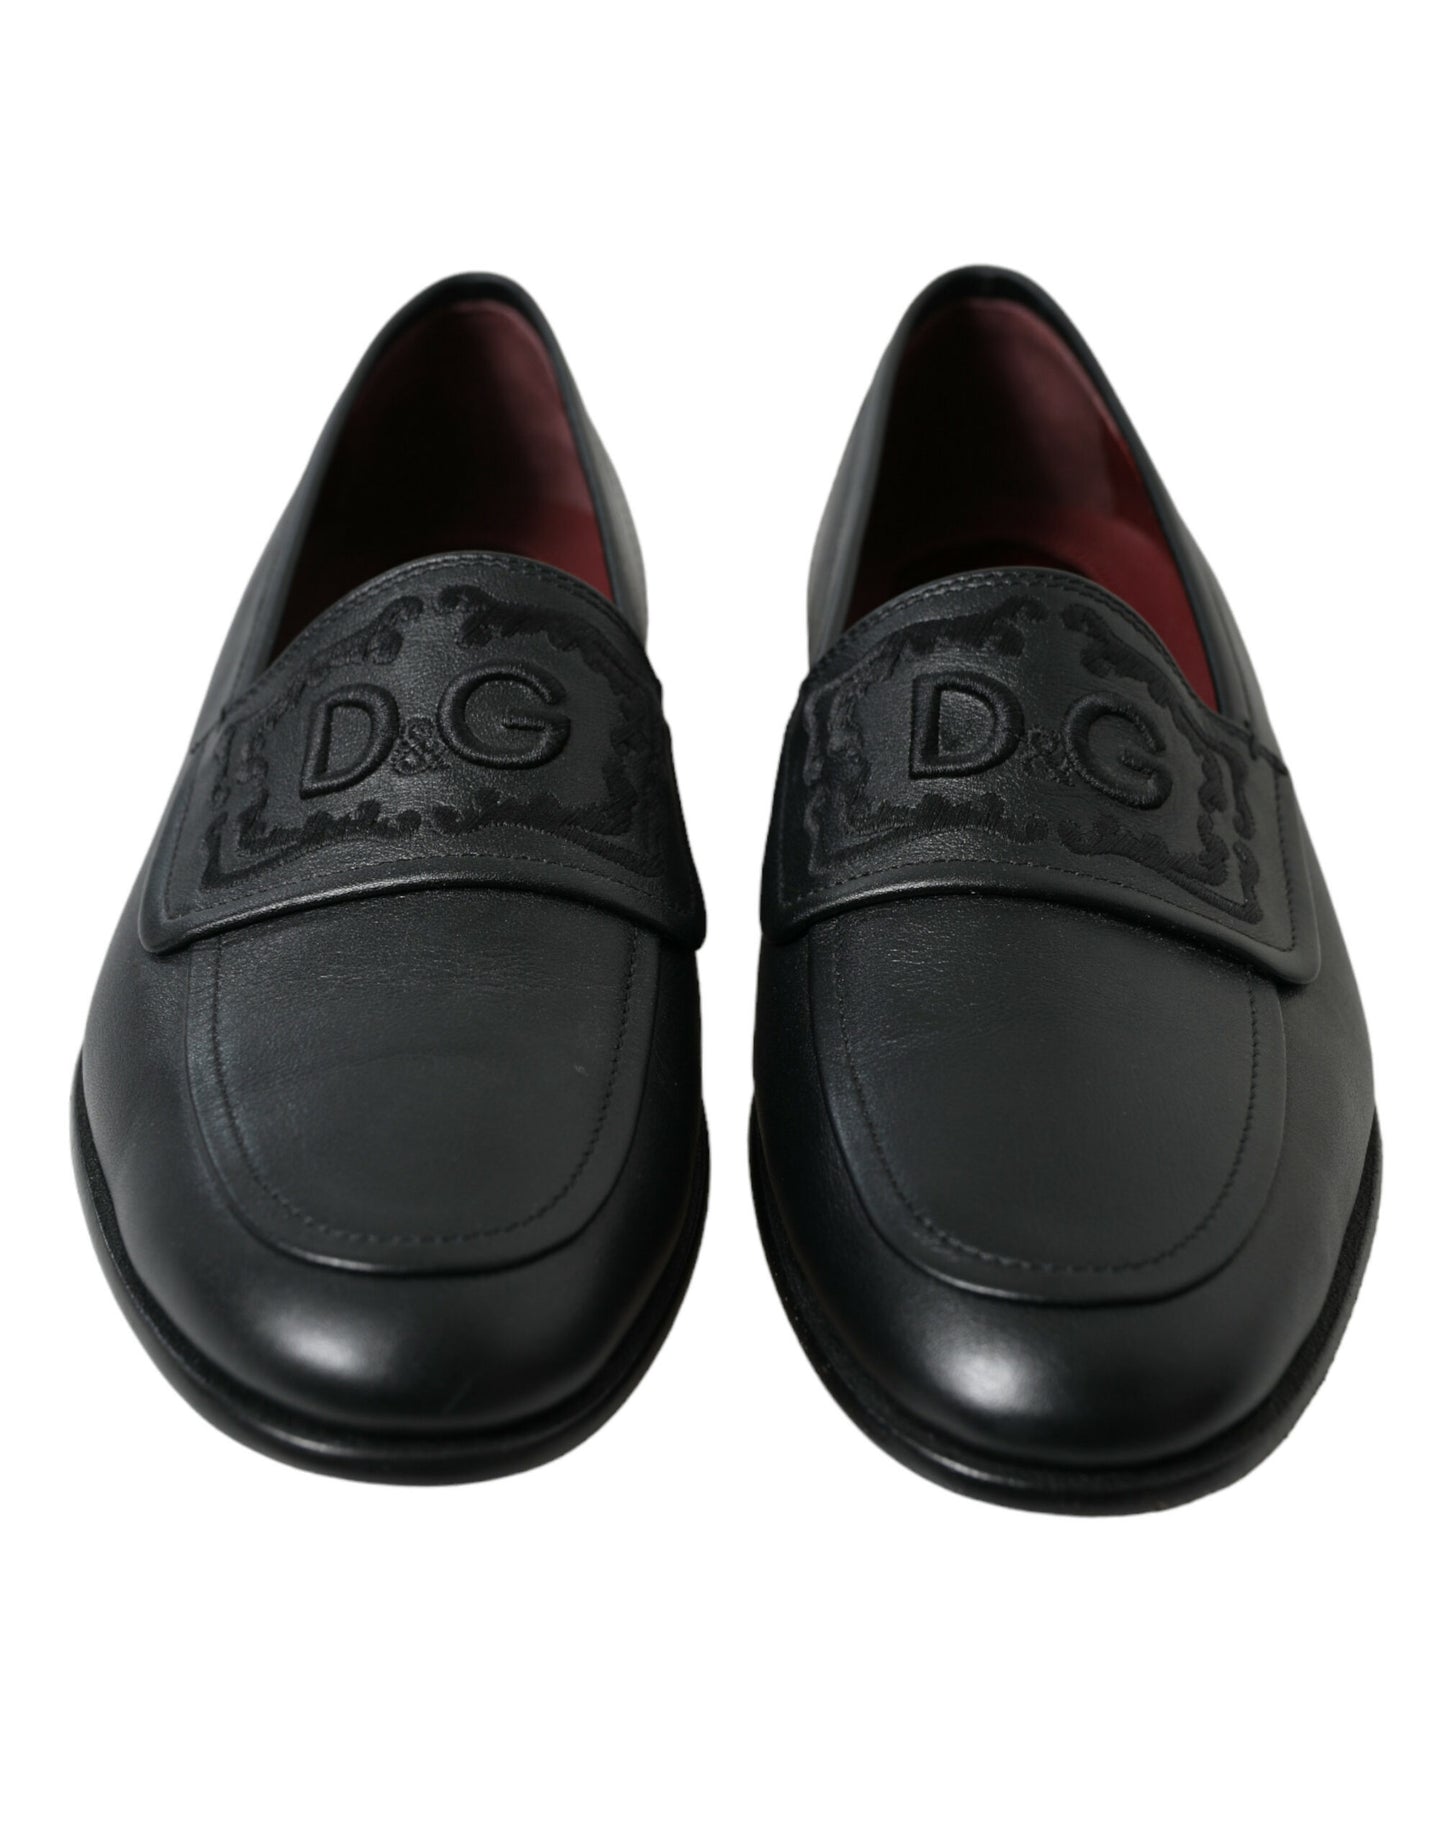 Dolce & gabbana black embroidered loafers